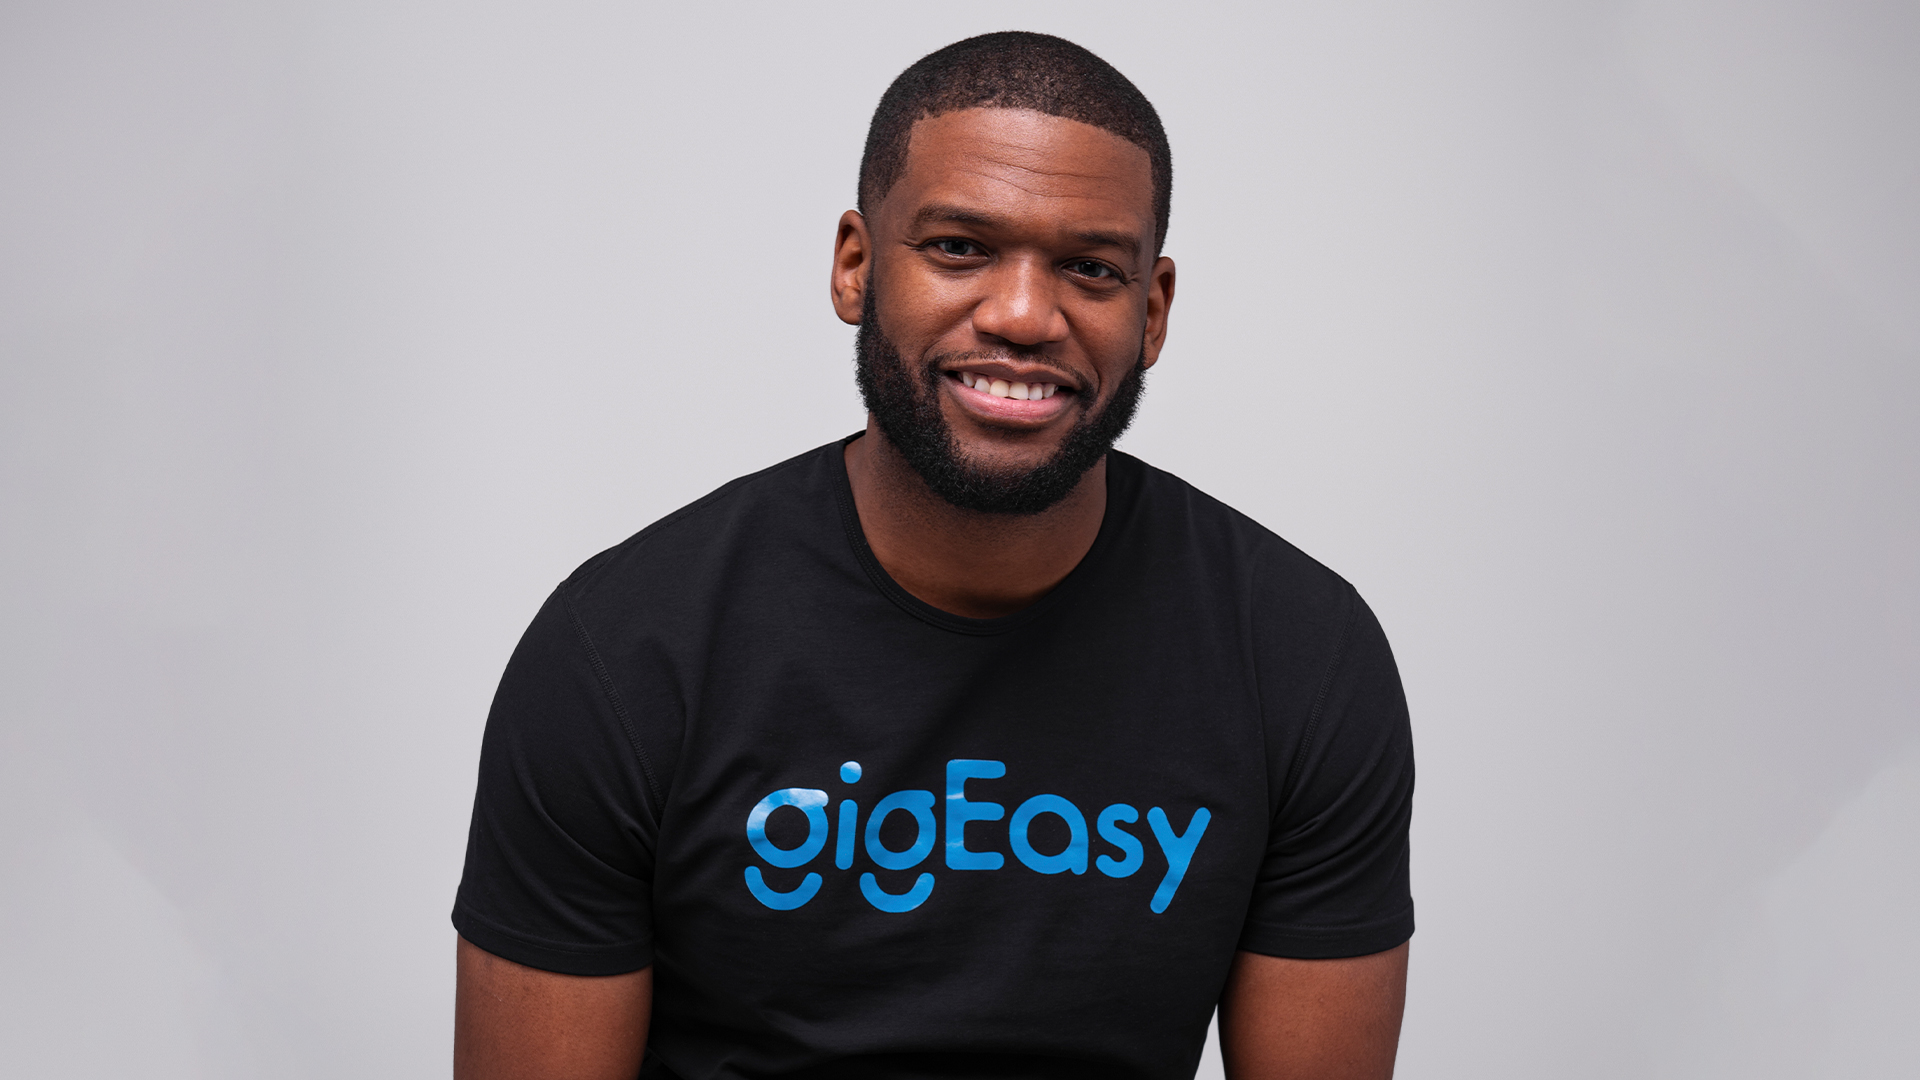 Rilwan Lawal’s GigEasy Secures $1.3M In Pre-Seed Funding To Help Ensure That Those Taking Part In The Gig Economy Have Benefits